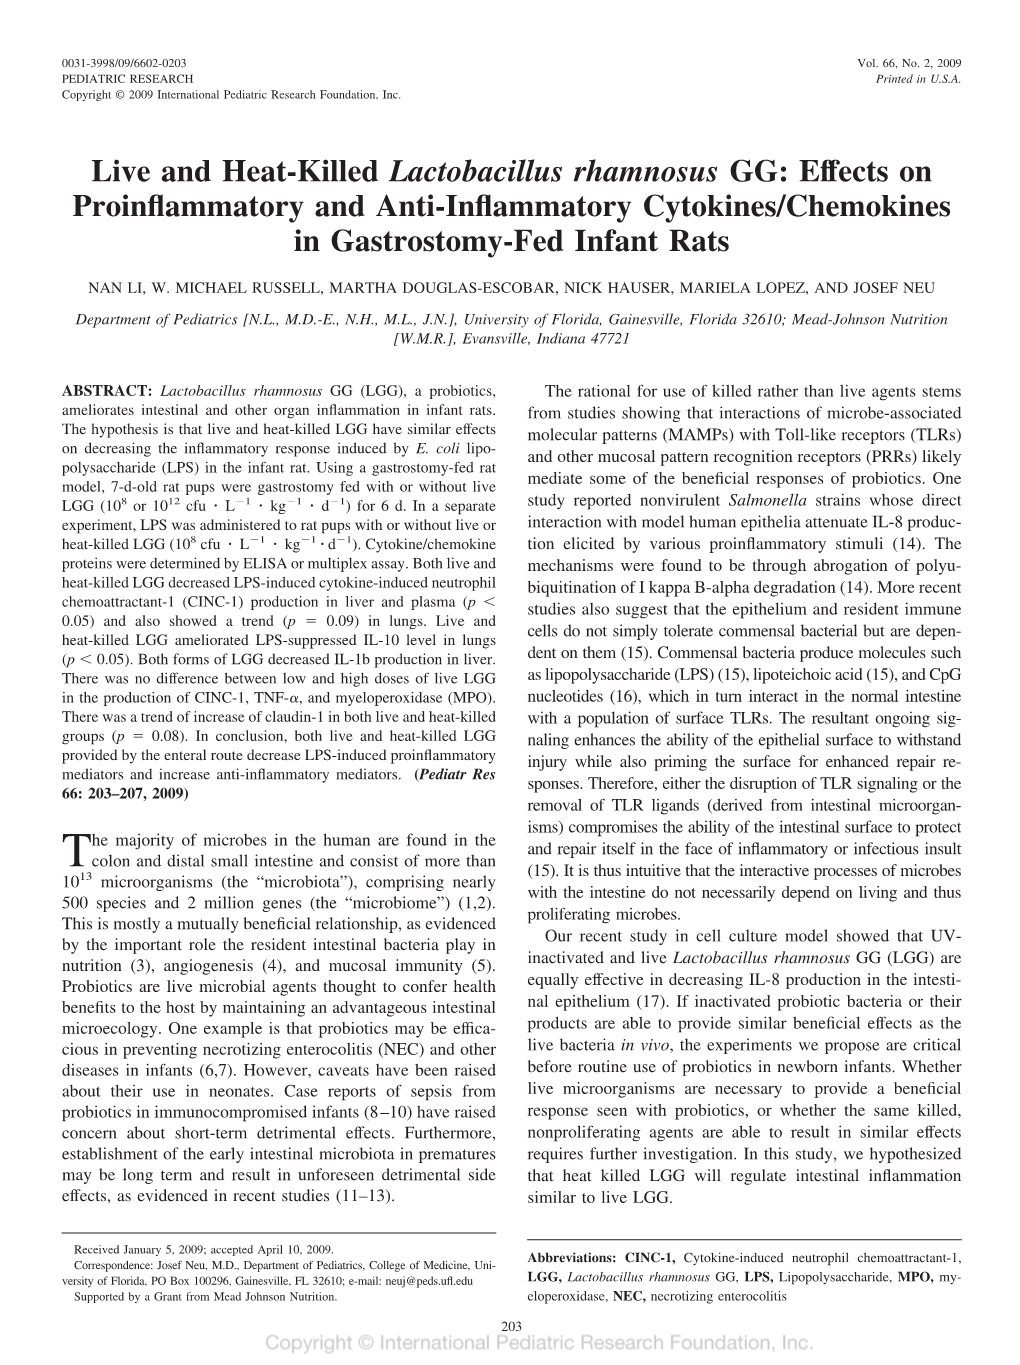 Live and Heat-Killed Lactobacillus Rhamnosus GG: Effects on Proinflammatory and Anti-Inflammatory Cytokines/Chemokines in Gastro